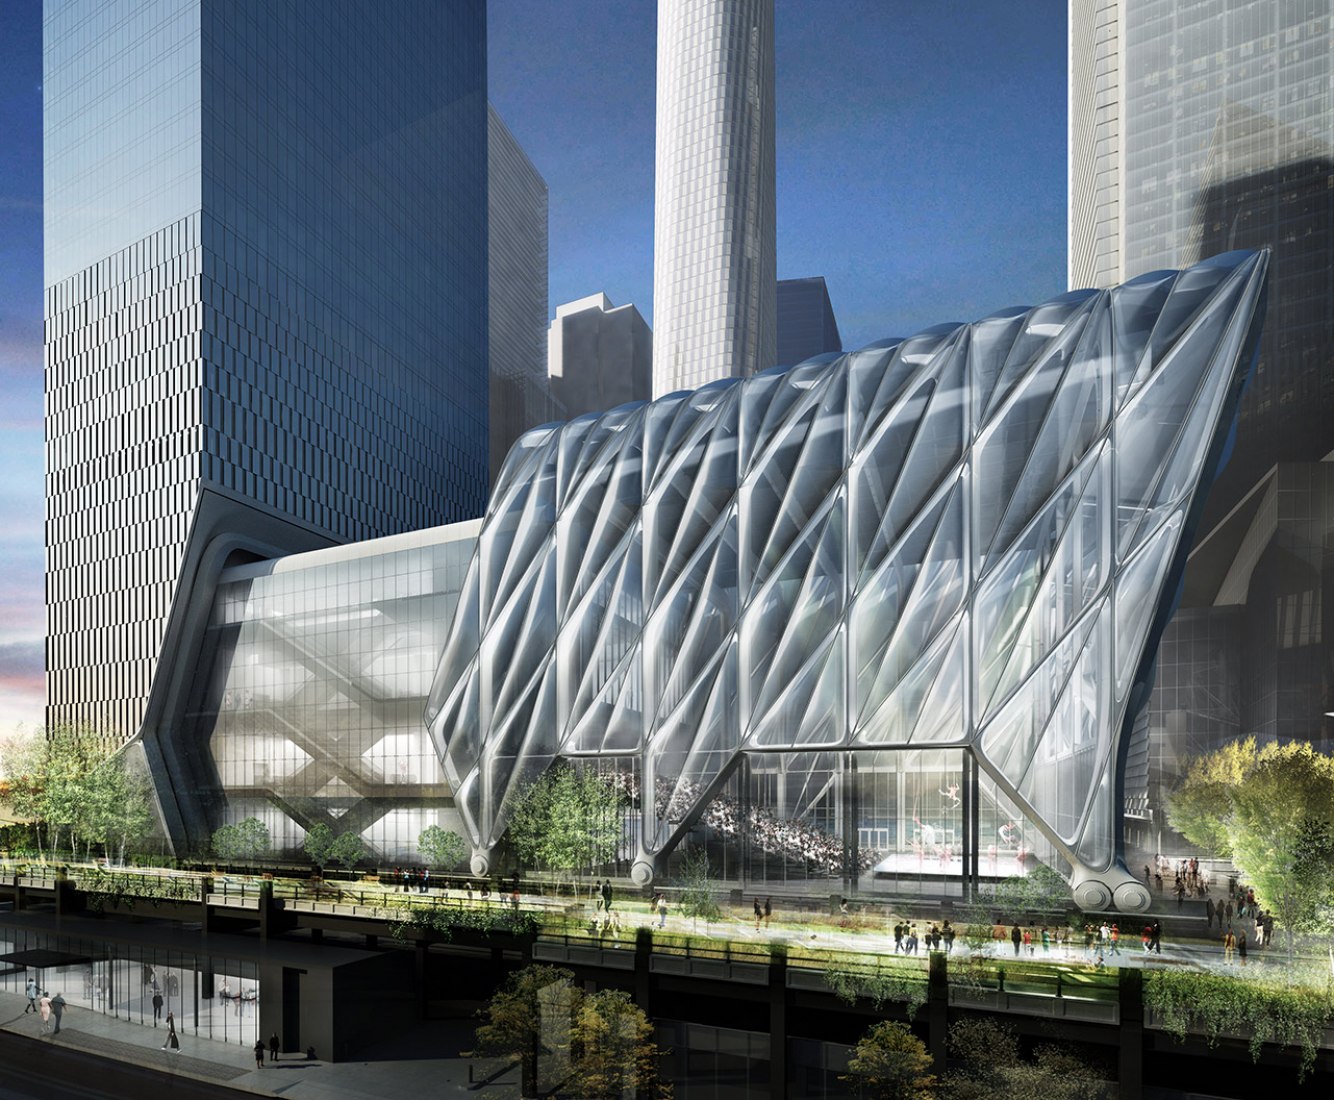 Render. The Shed by Diller Scofidio + Renfro. Image coutesy of Rockwell Group.